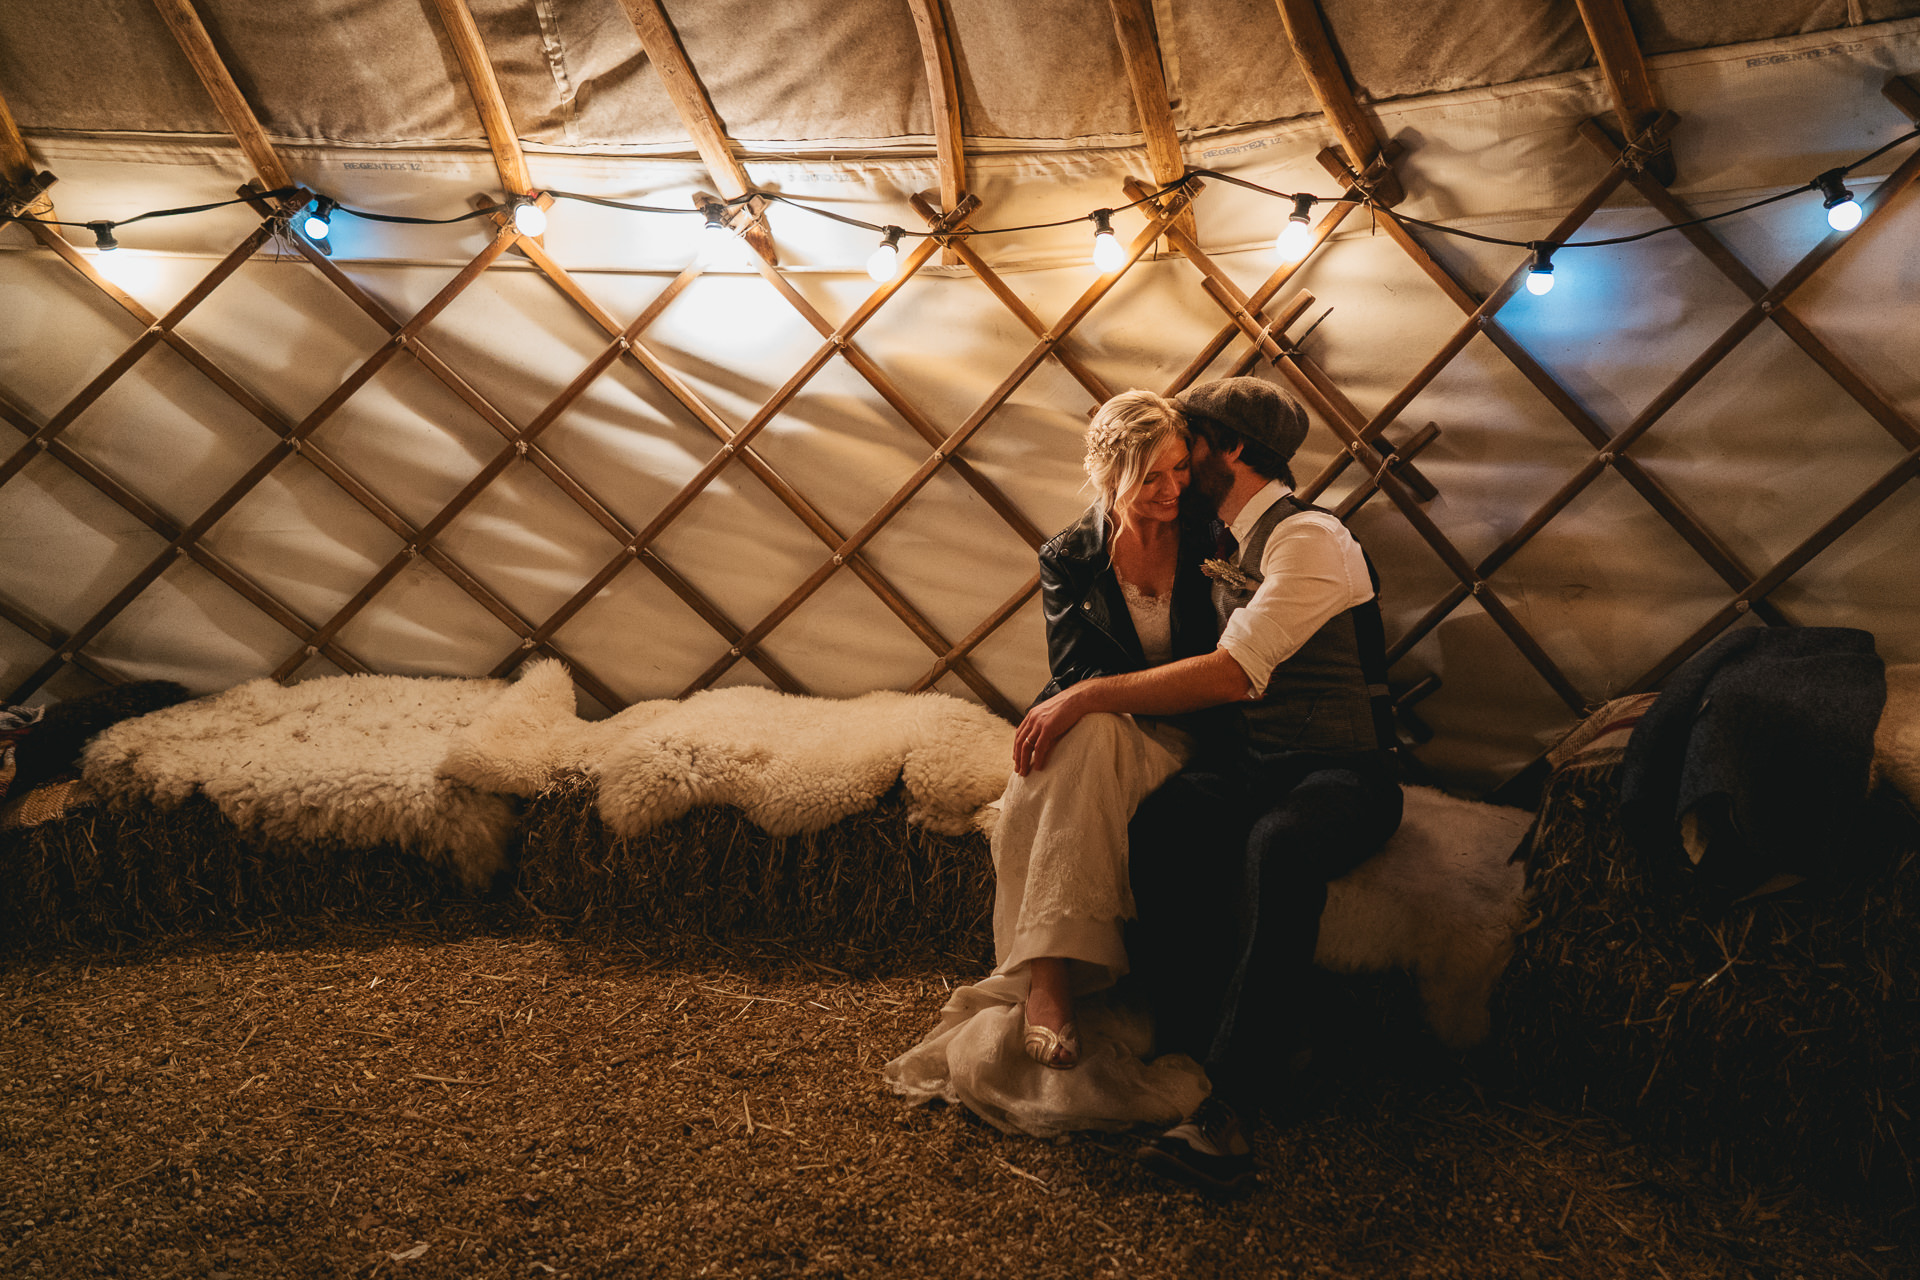 Groom and bride in leather jacket in a yurt